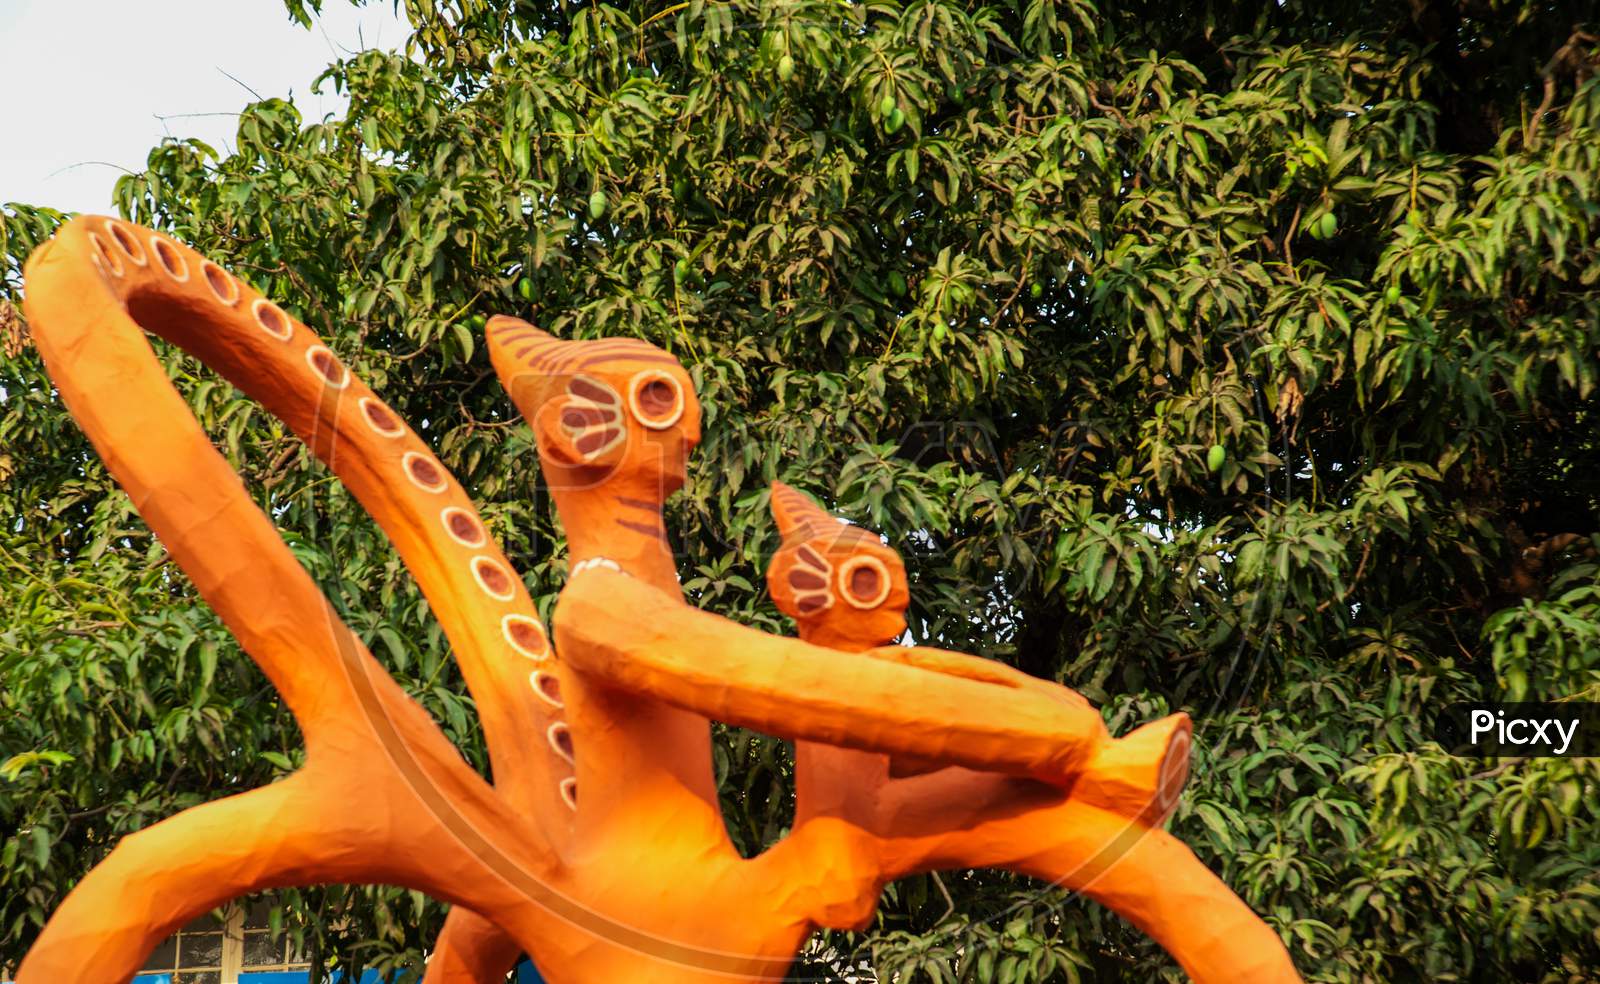 Masks Made By Students Of T Art Institute Of Dhaka University For T Bengali New Year Celebration, In Dhaka And April 14 1St Boishakh Bengali New Year.